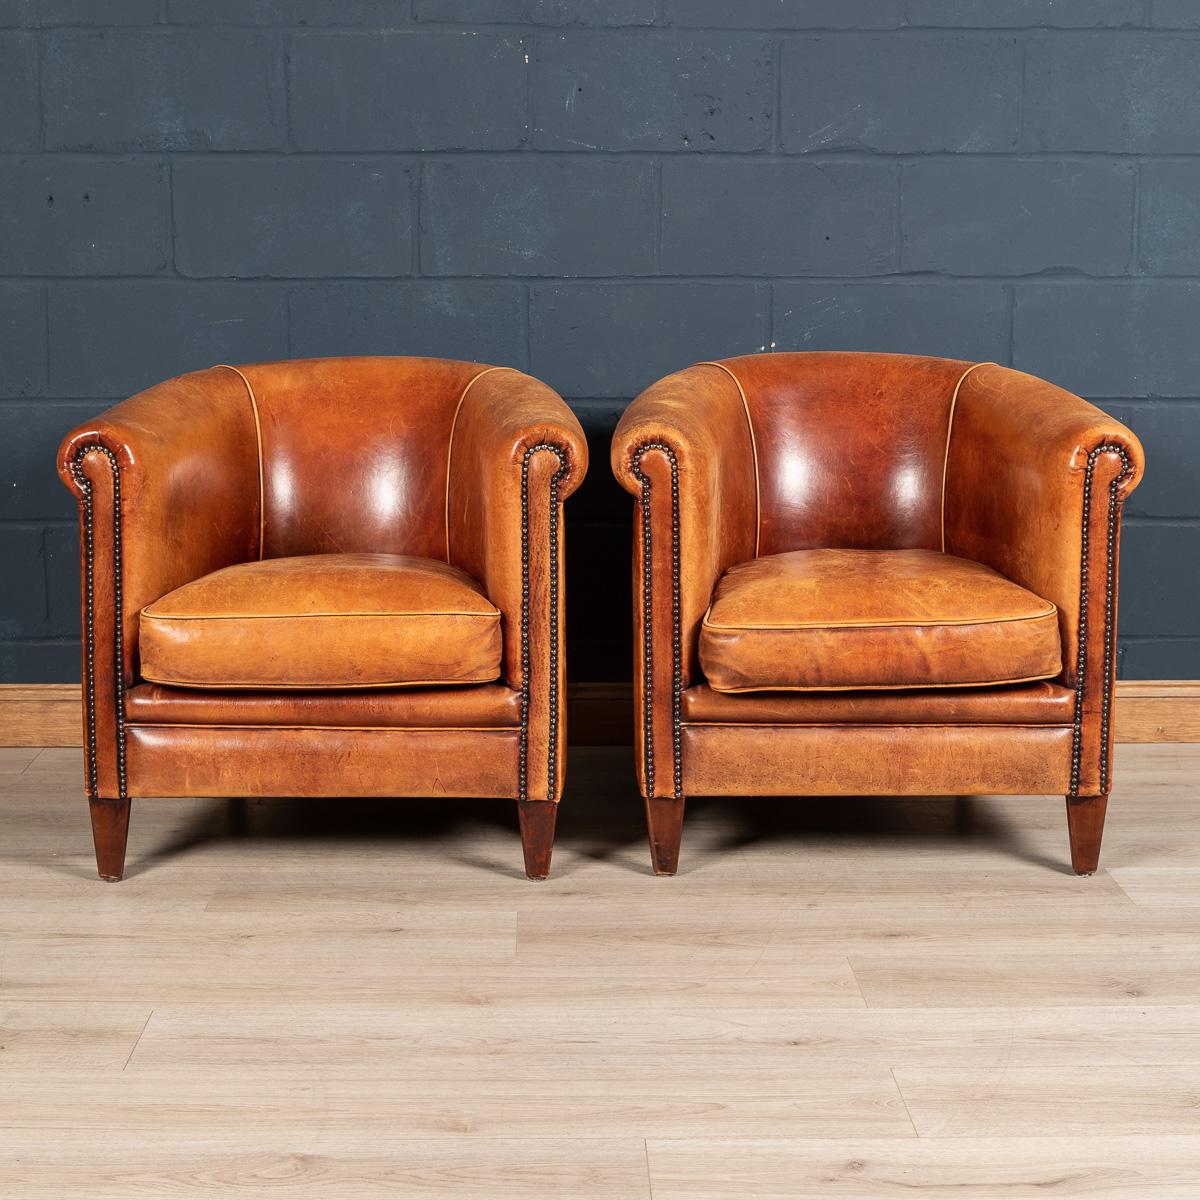 Showing superb patina and colour, this wonderful pair of tub chairs were hand upholstered sheepskin leather in Holland by the finest craftsmen. Fantastic look for any interior, both modern and traditional.

Please note that our interior pieces are